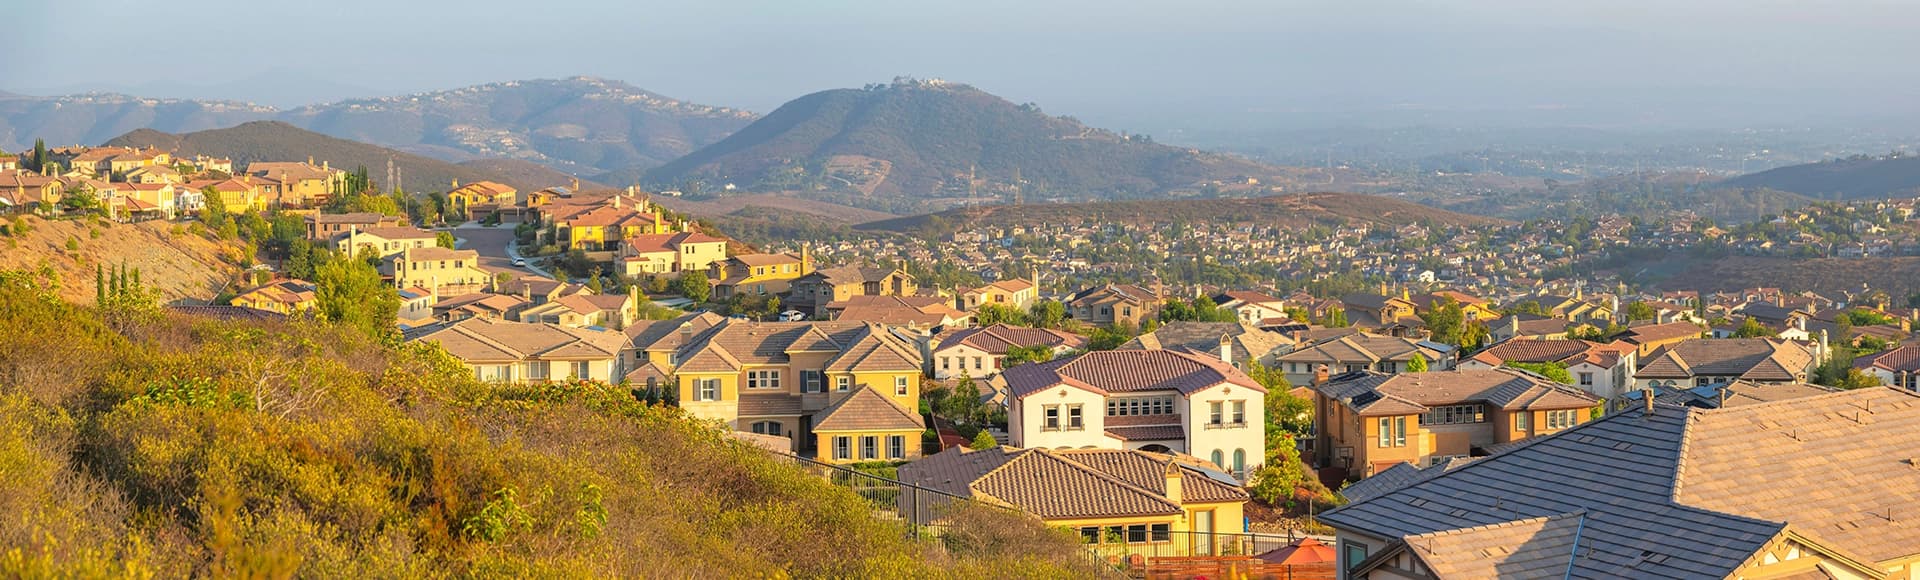 Residential neighborhood with large houses at San Marcos, California